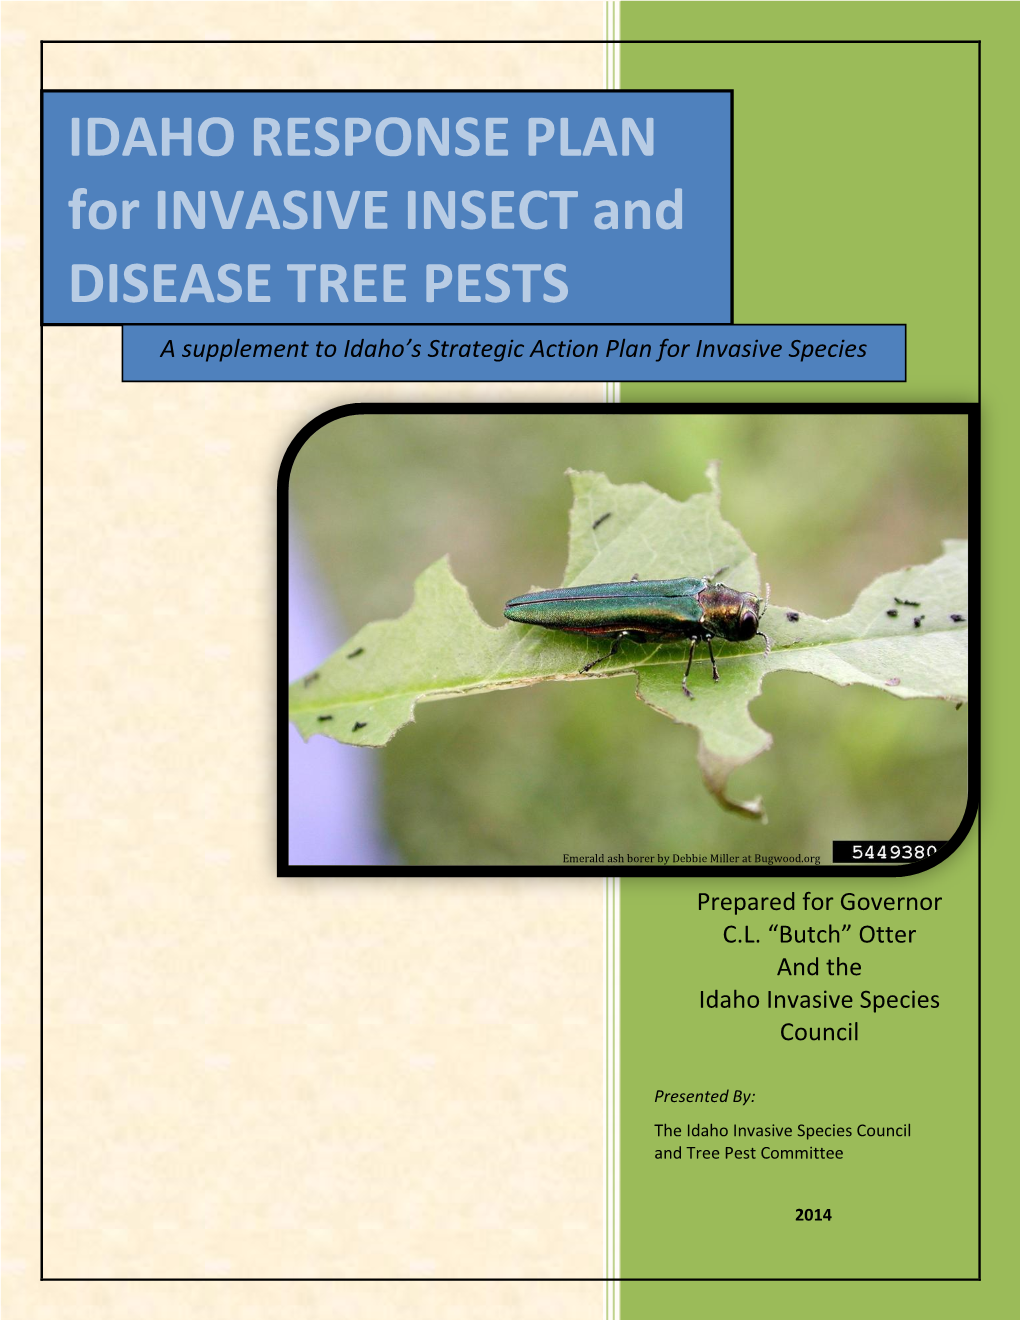 IDAHO RESPONSE PLAN for INVASIVE INSECT and DISEASE TREE PESTS a Supplement to Idaho’S Strategic Action Plan for Invasive Species